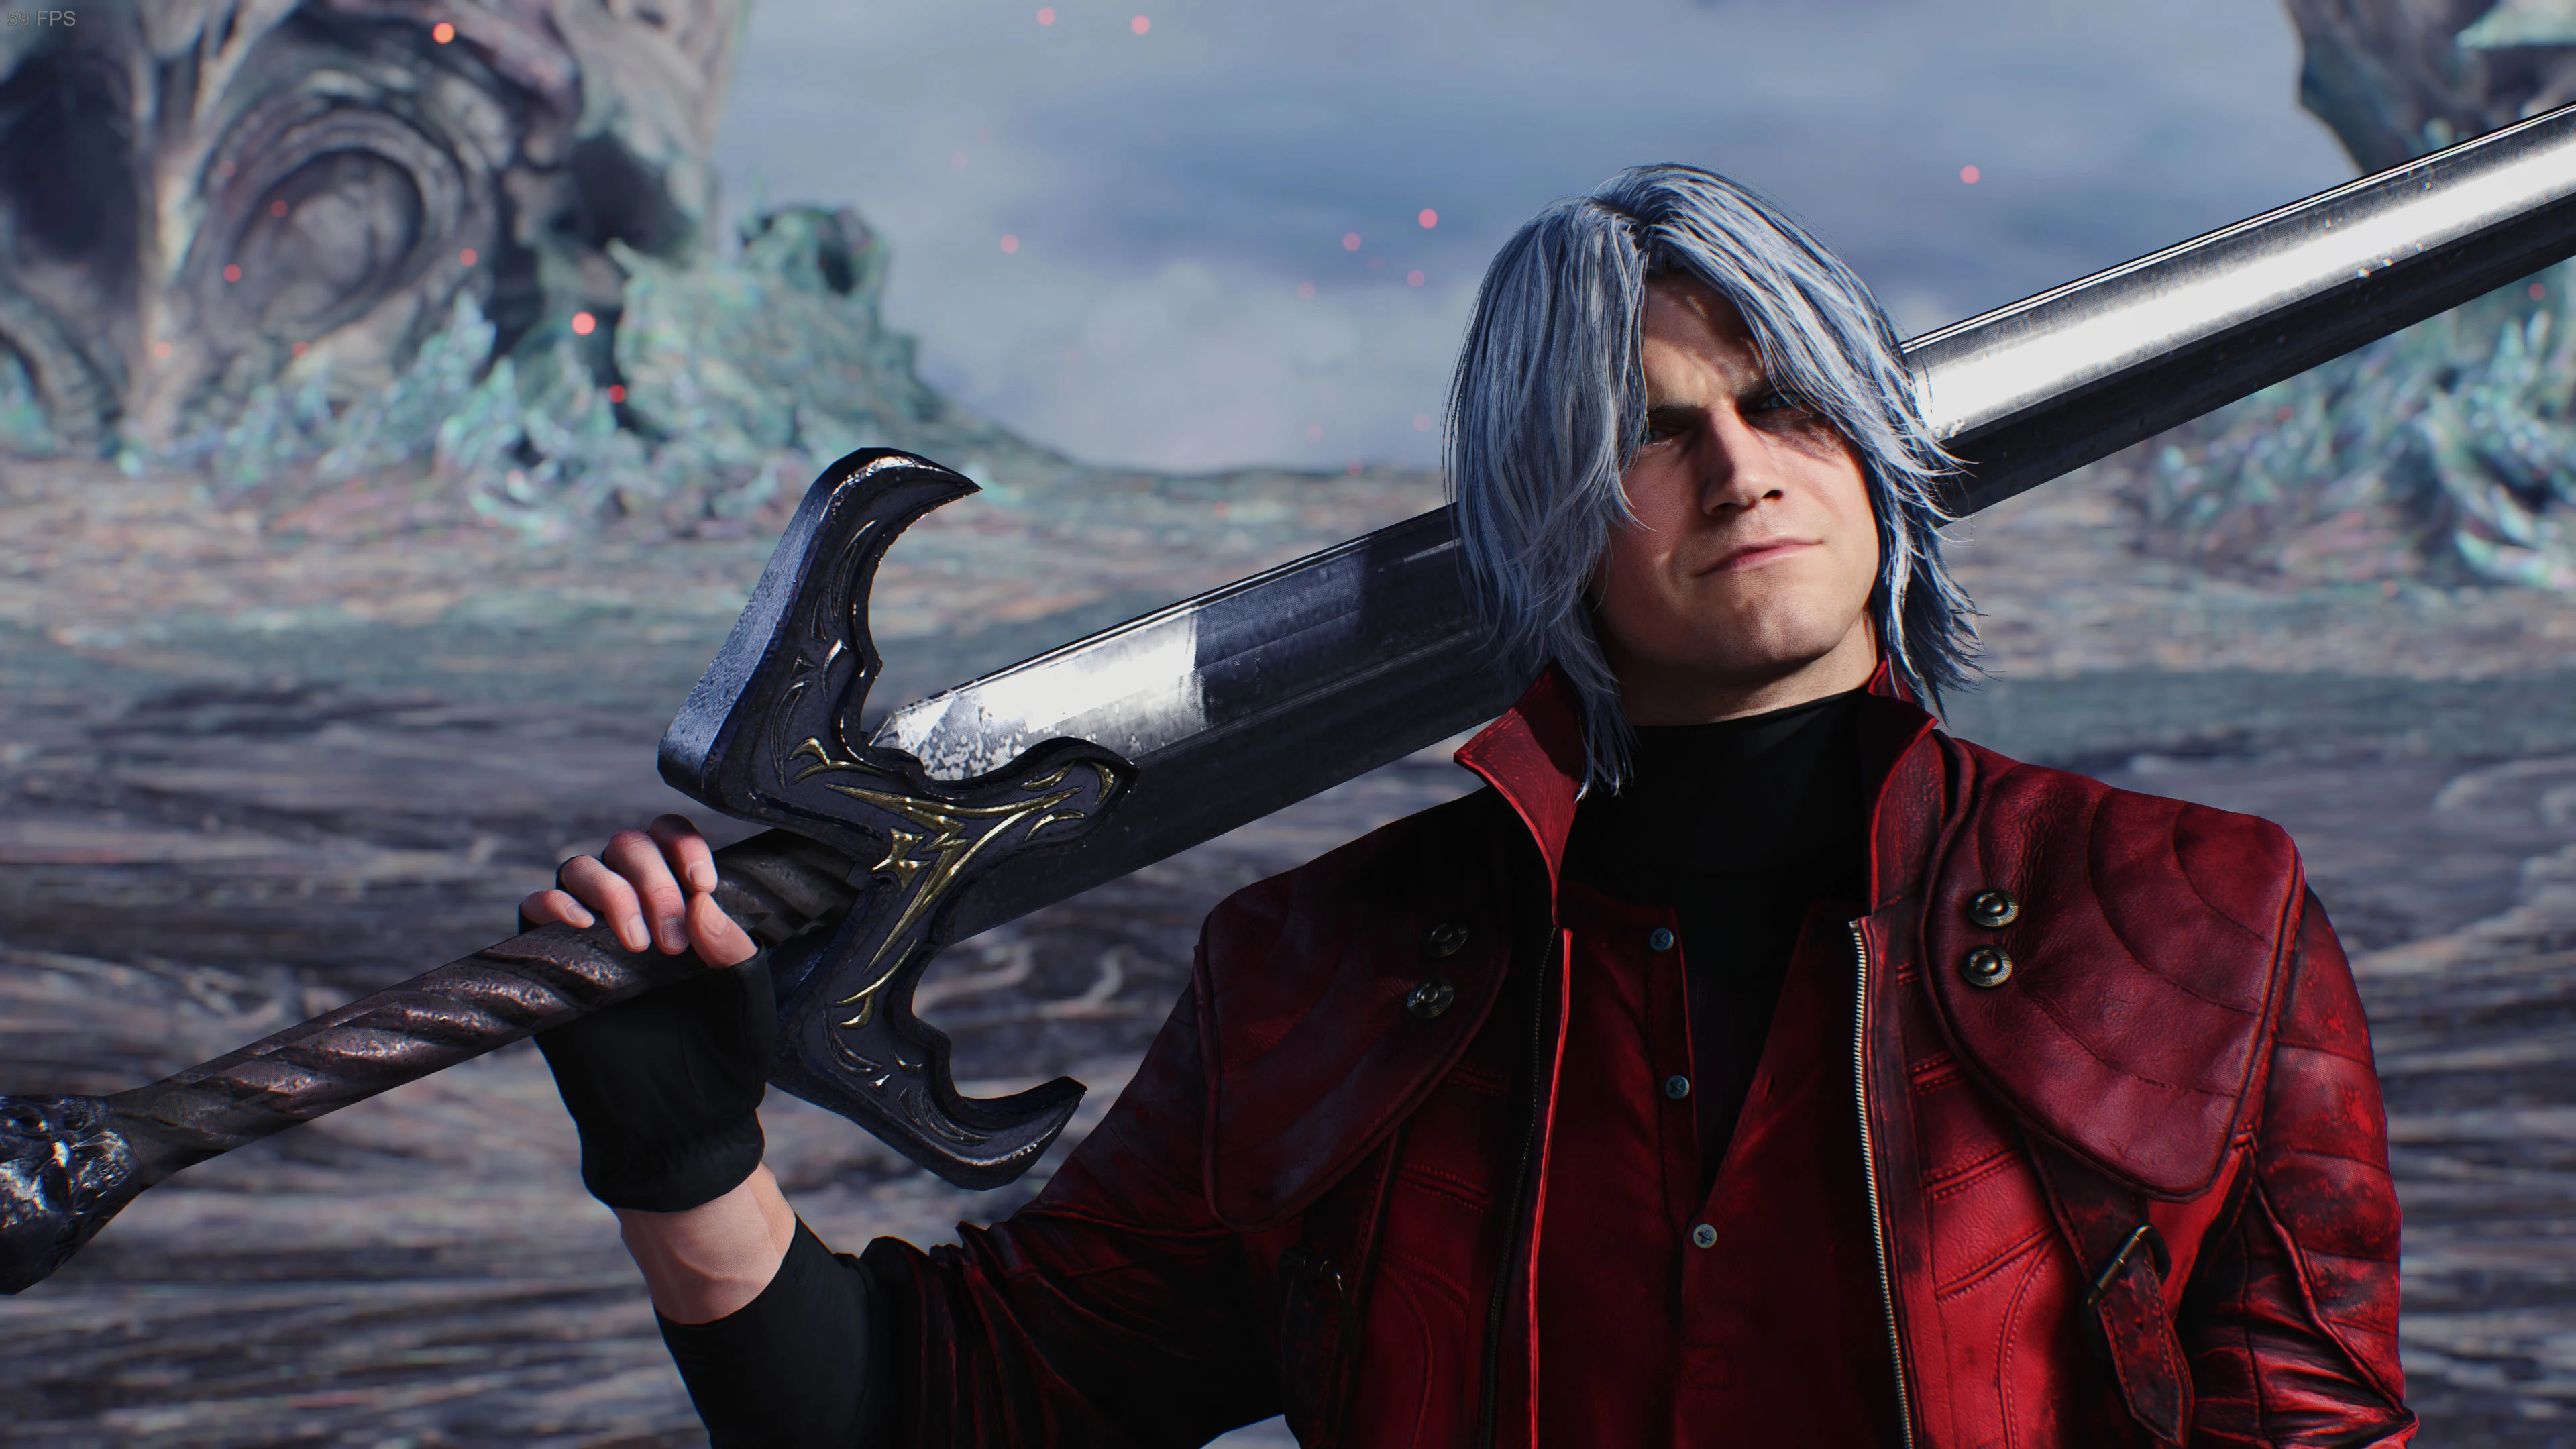 free download dante devil may cry 5